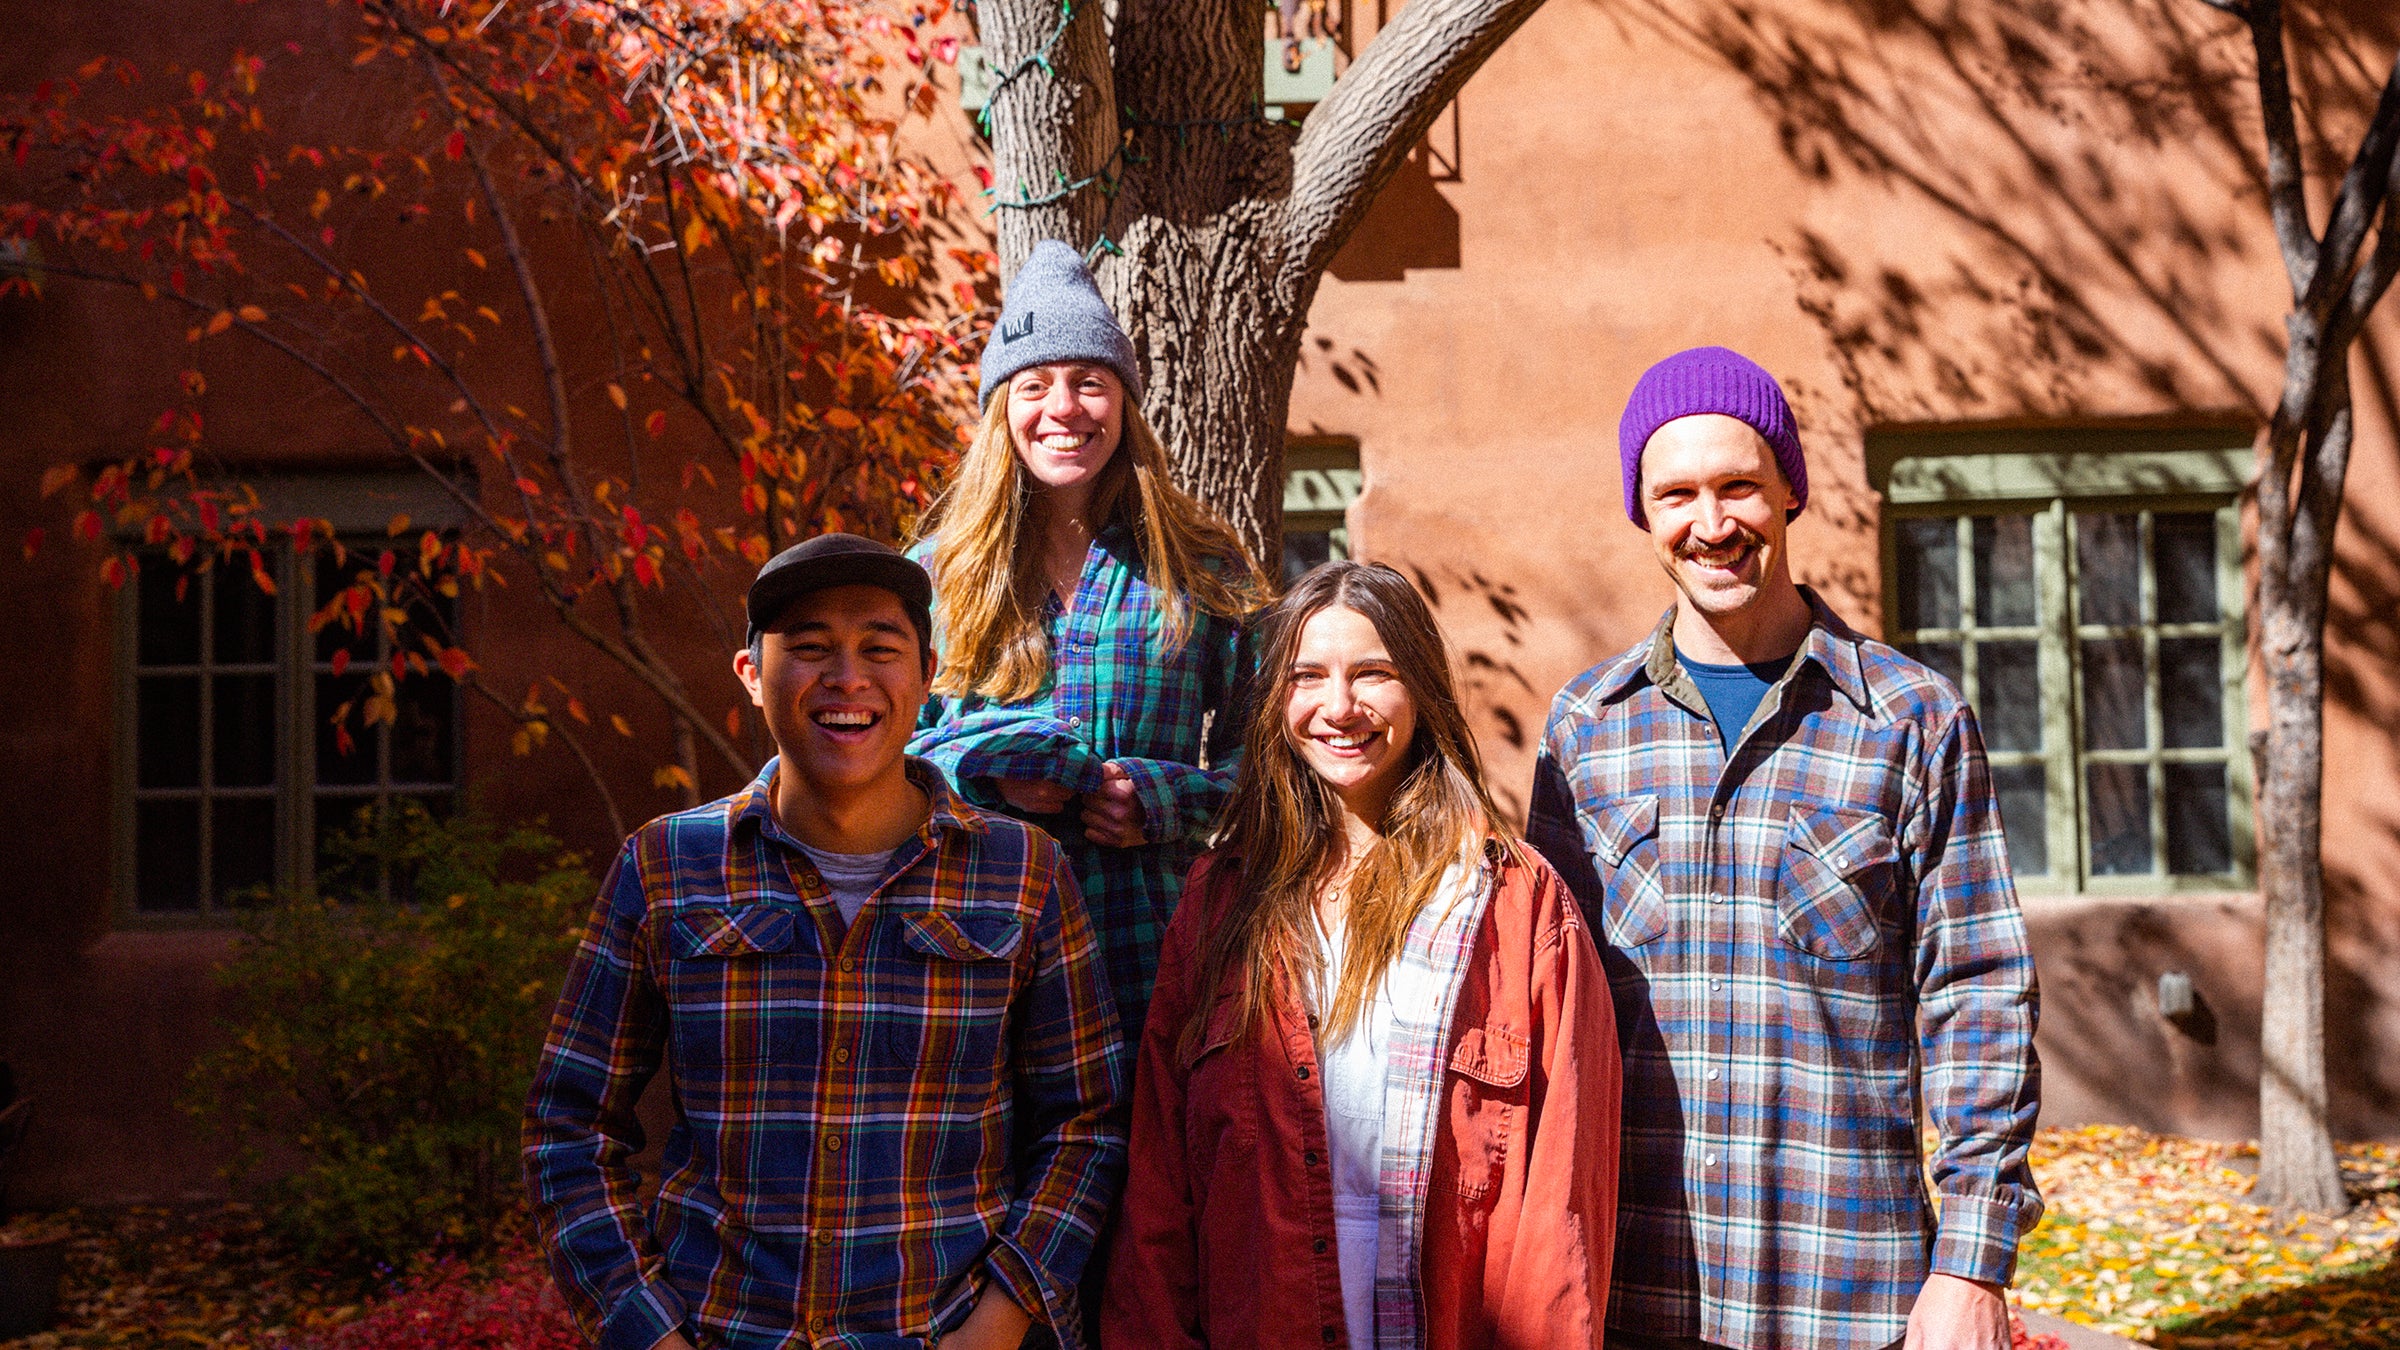 Our Favorite Flannel Shirts Tell the Best Stories - Outside Online